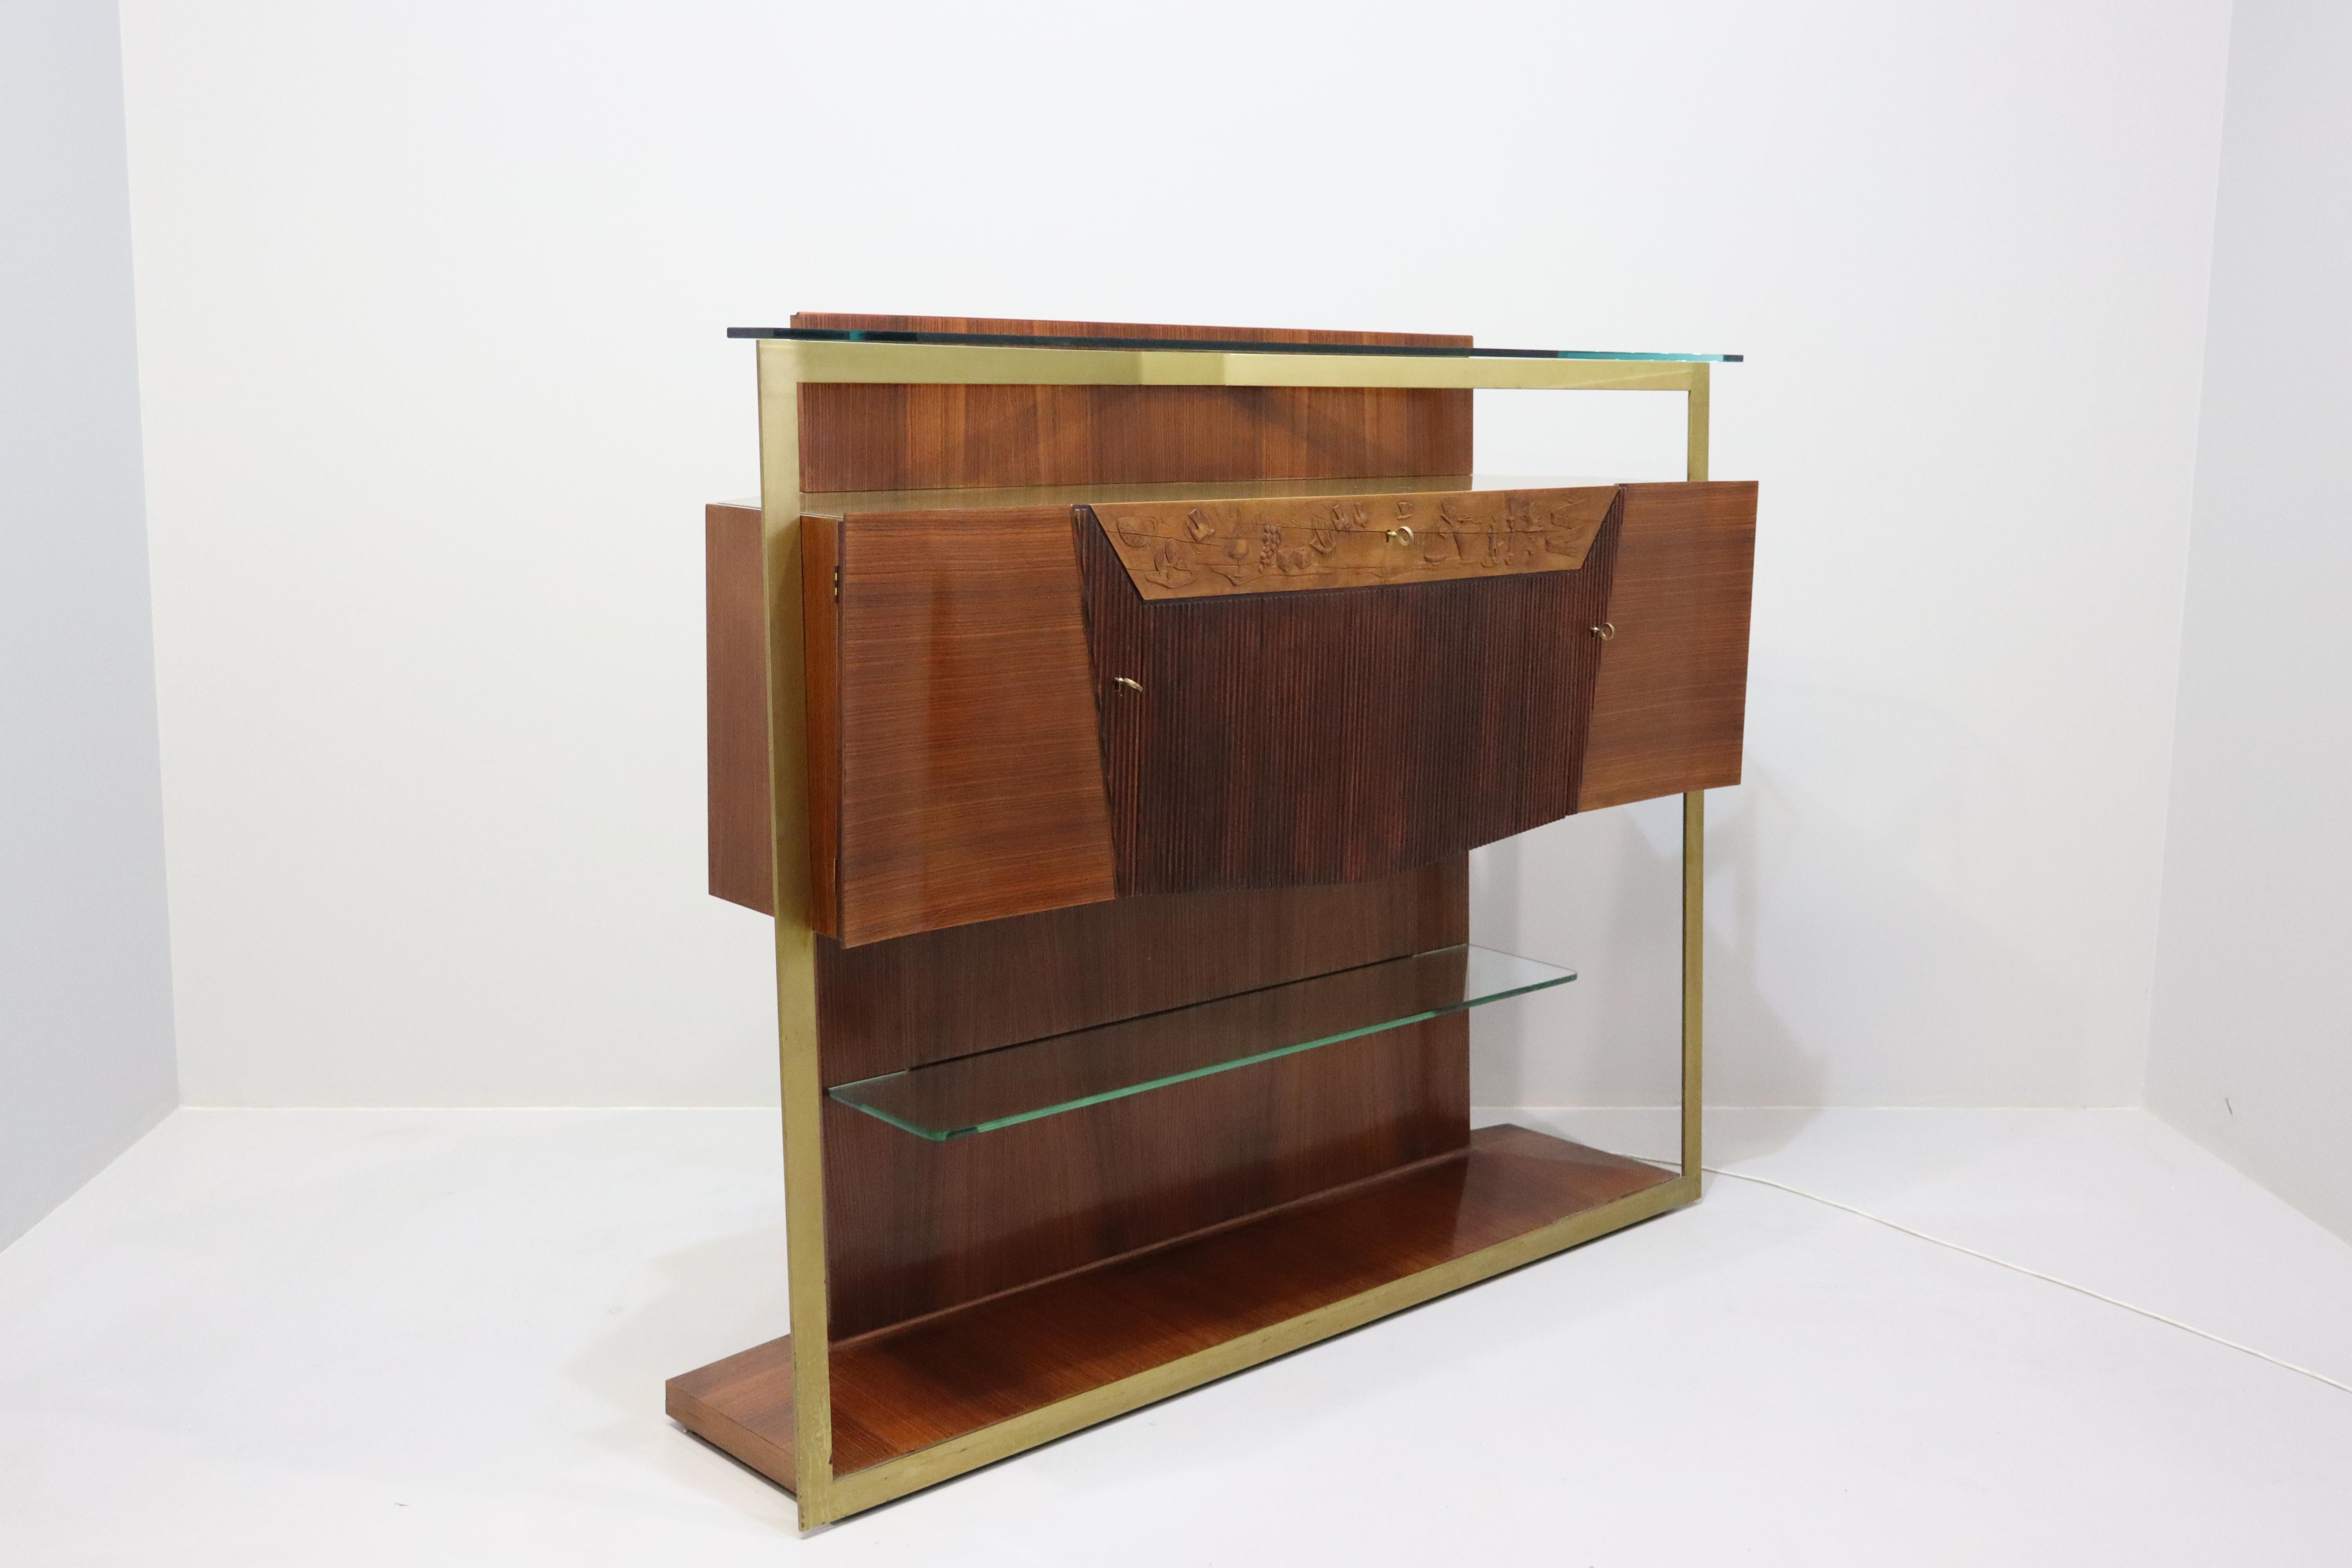 Spectacular rosewood sideboard and/or bar cabinet designed by Vittorio Dassi in the 1950s.